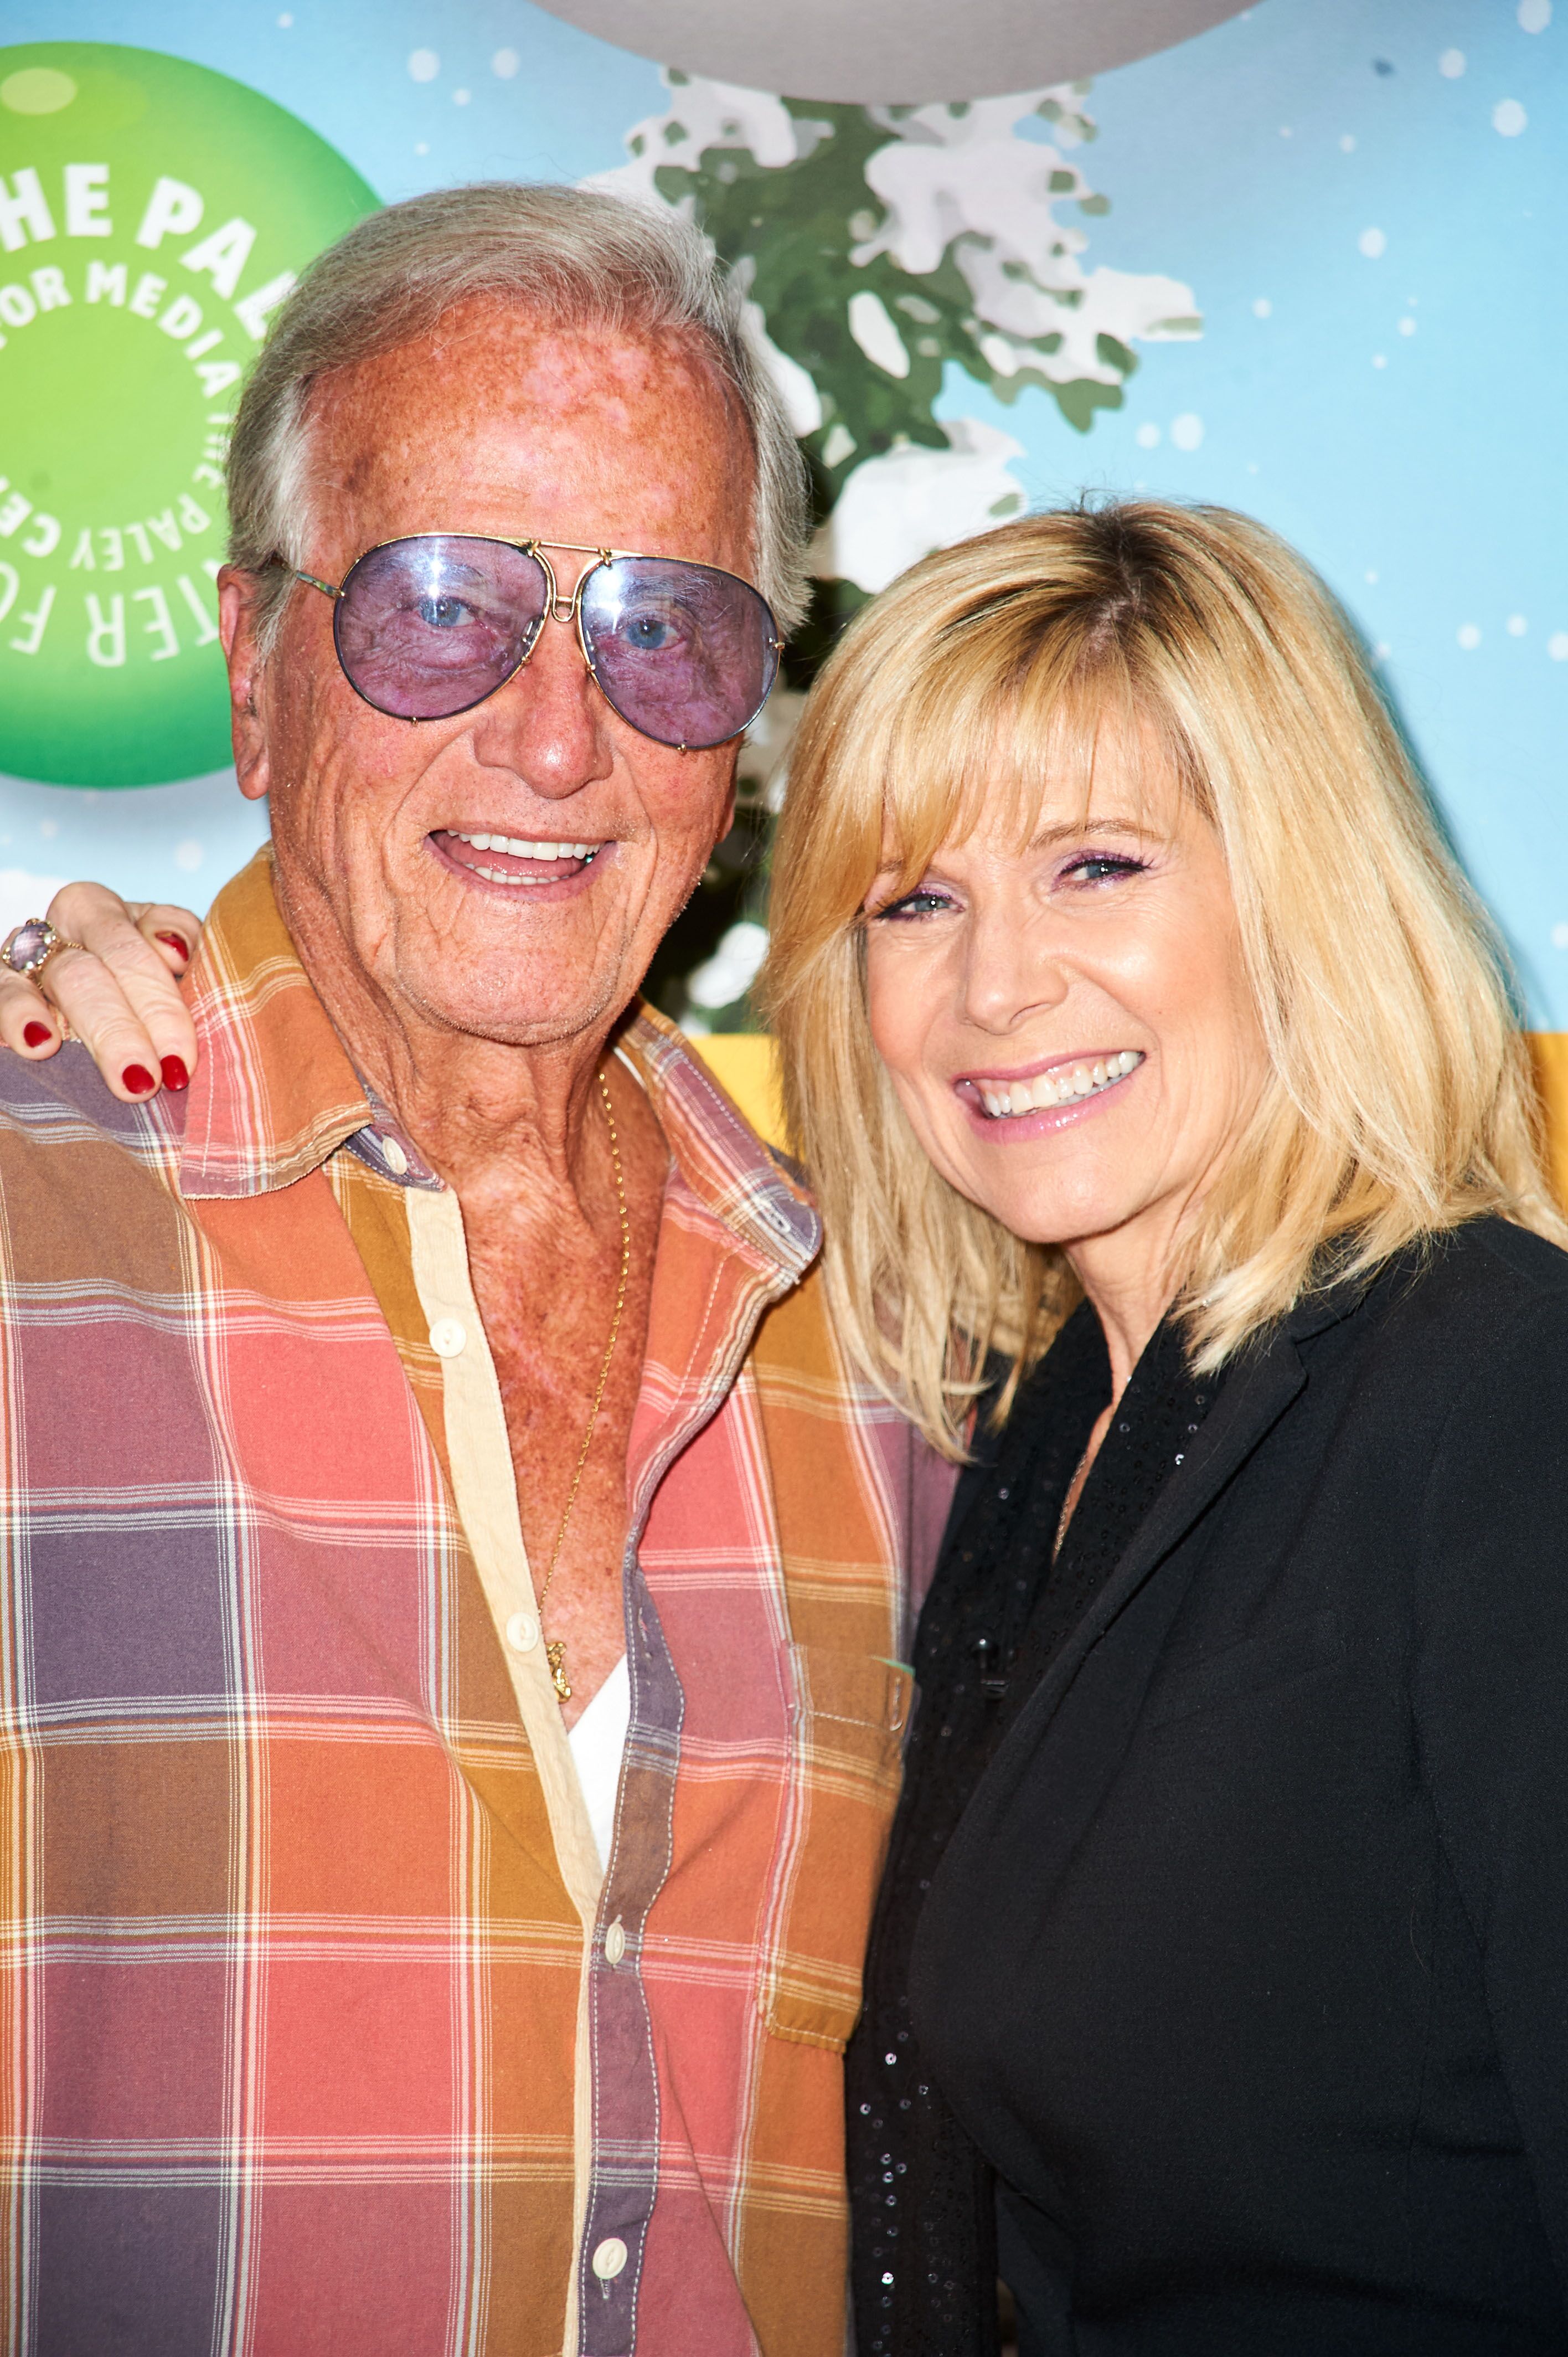 Pat Boone with father Pat Boone at The Paley Center Presents A Holiday Celebration With Debby Boone: You Light Up My Life 40th Anniversary Event in 2017 | Source: Getty Image